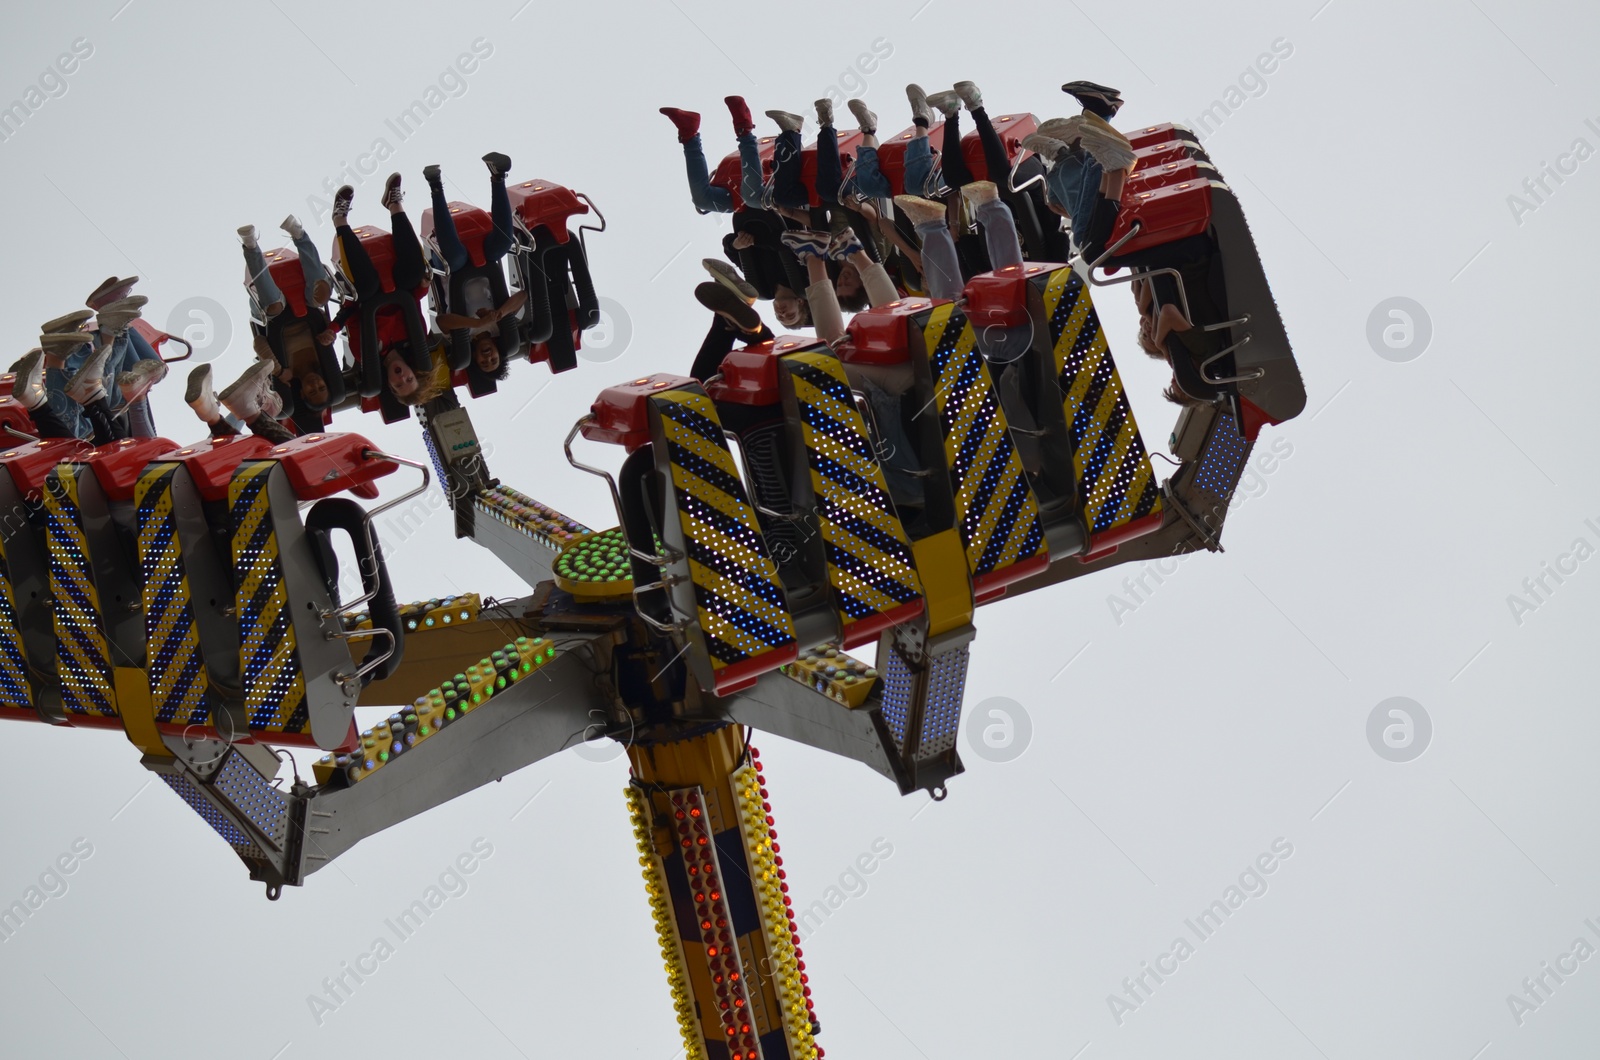 Photo of GRONINGEN, NETHERLANDS - MAY 20, 2022: People at pendulum ride attraction in outdoor amusement park